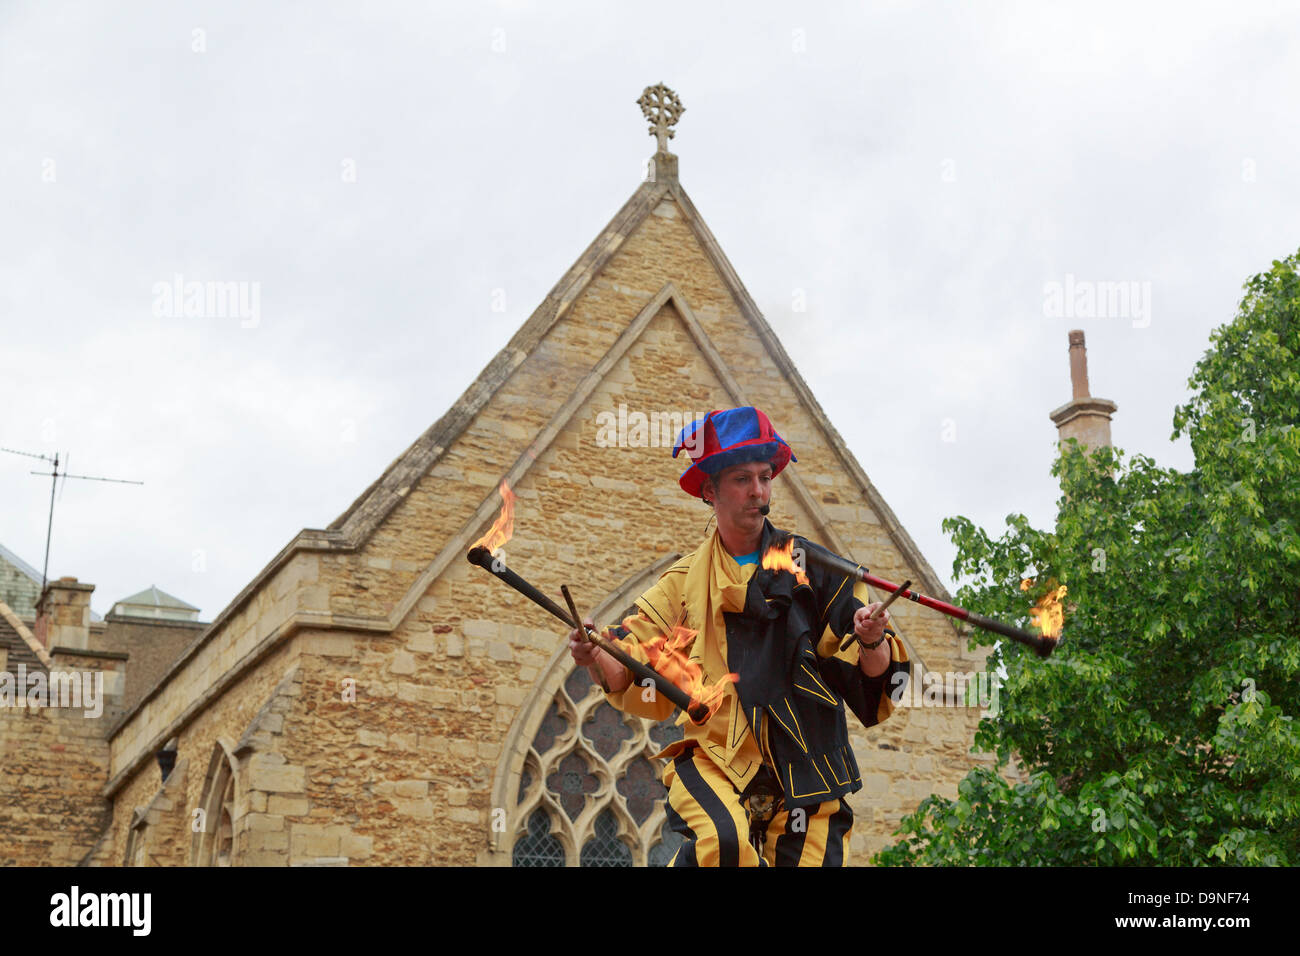 Jester riding a tall unicycle and juggling sticks with fire, Peterborough Heritage Festival 22 June 2013, England Stock Photo